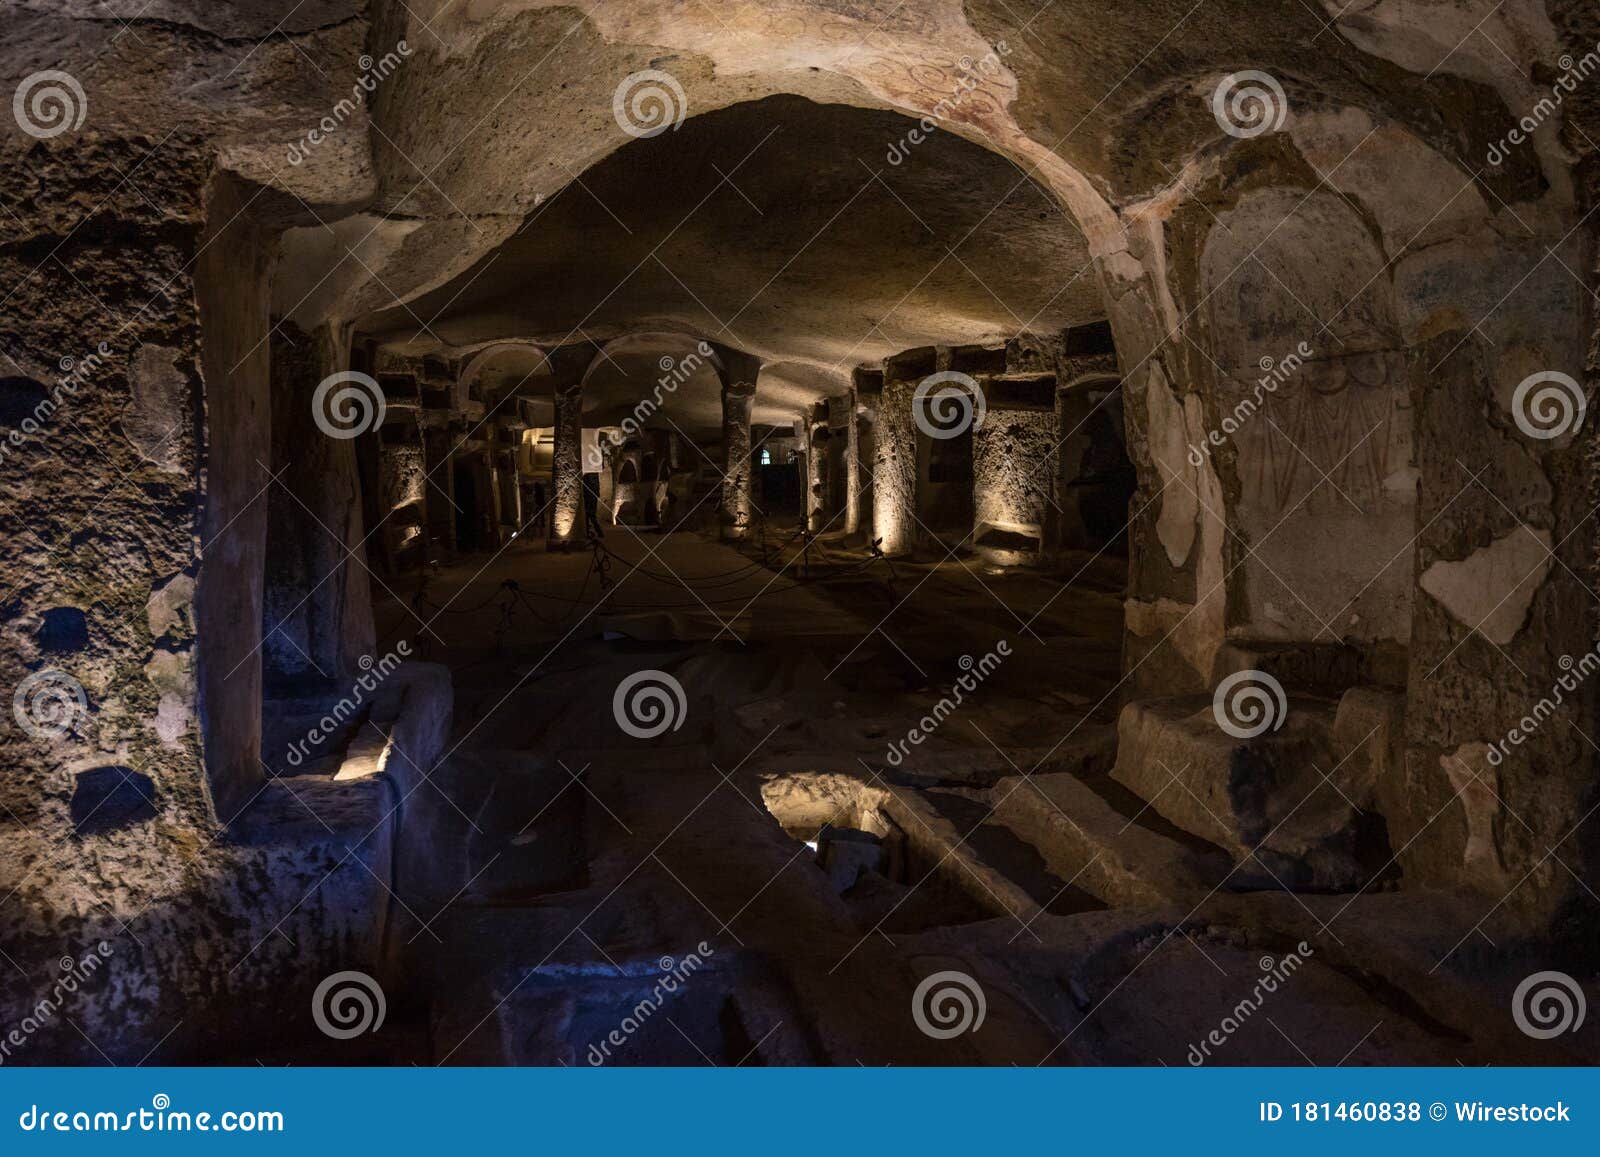 beautiful view of the interior of catacombs of san gennaro, rione sanita in naples, italy